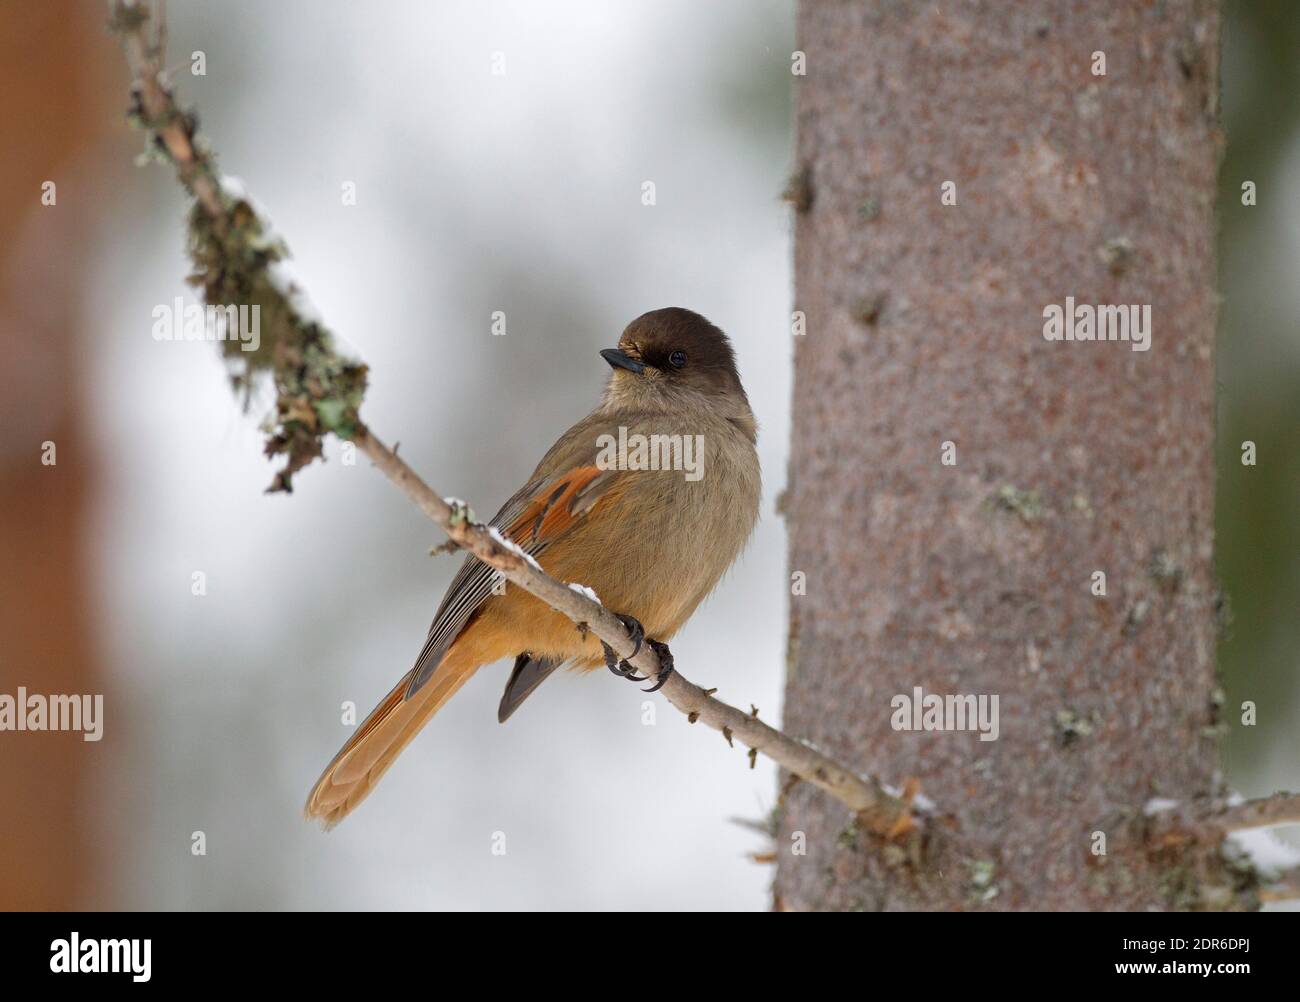 Siberian Jay, Perisoreus infaustus, single adult perched in tree. Taken February, Central Sweden. Stock Photo